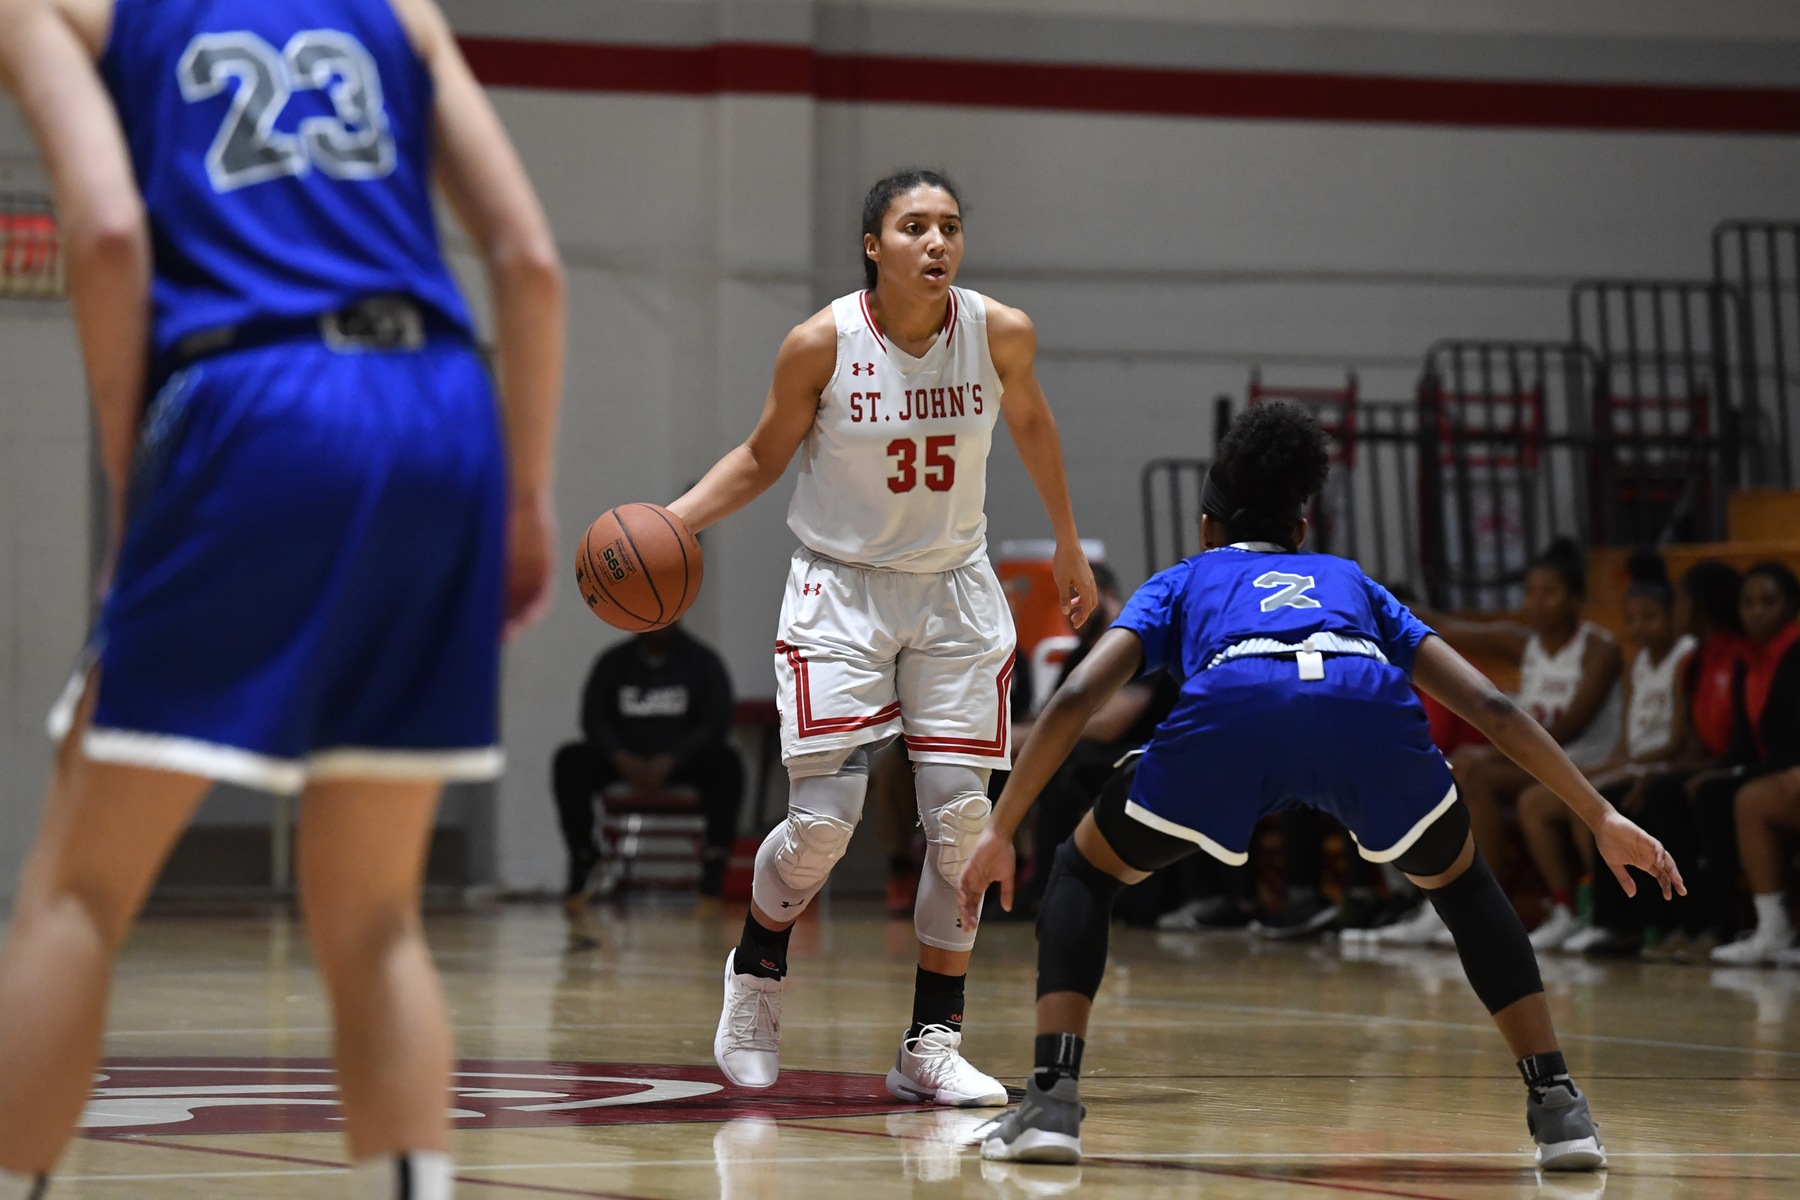 Sophomore Azzi Fudd (pictured in an earlier game) was kept in check, however still finished with 18 points in the win. (Photo from St. John's)